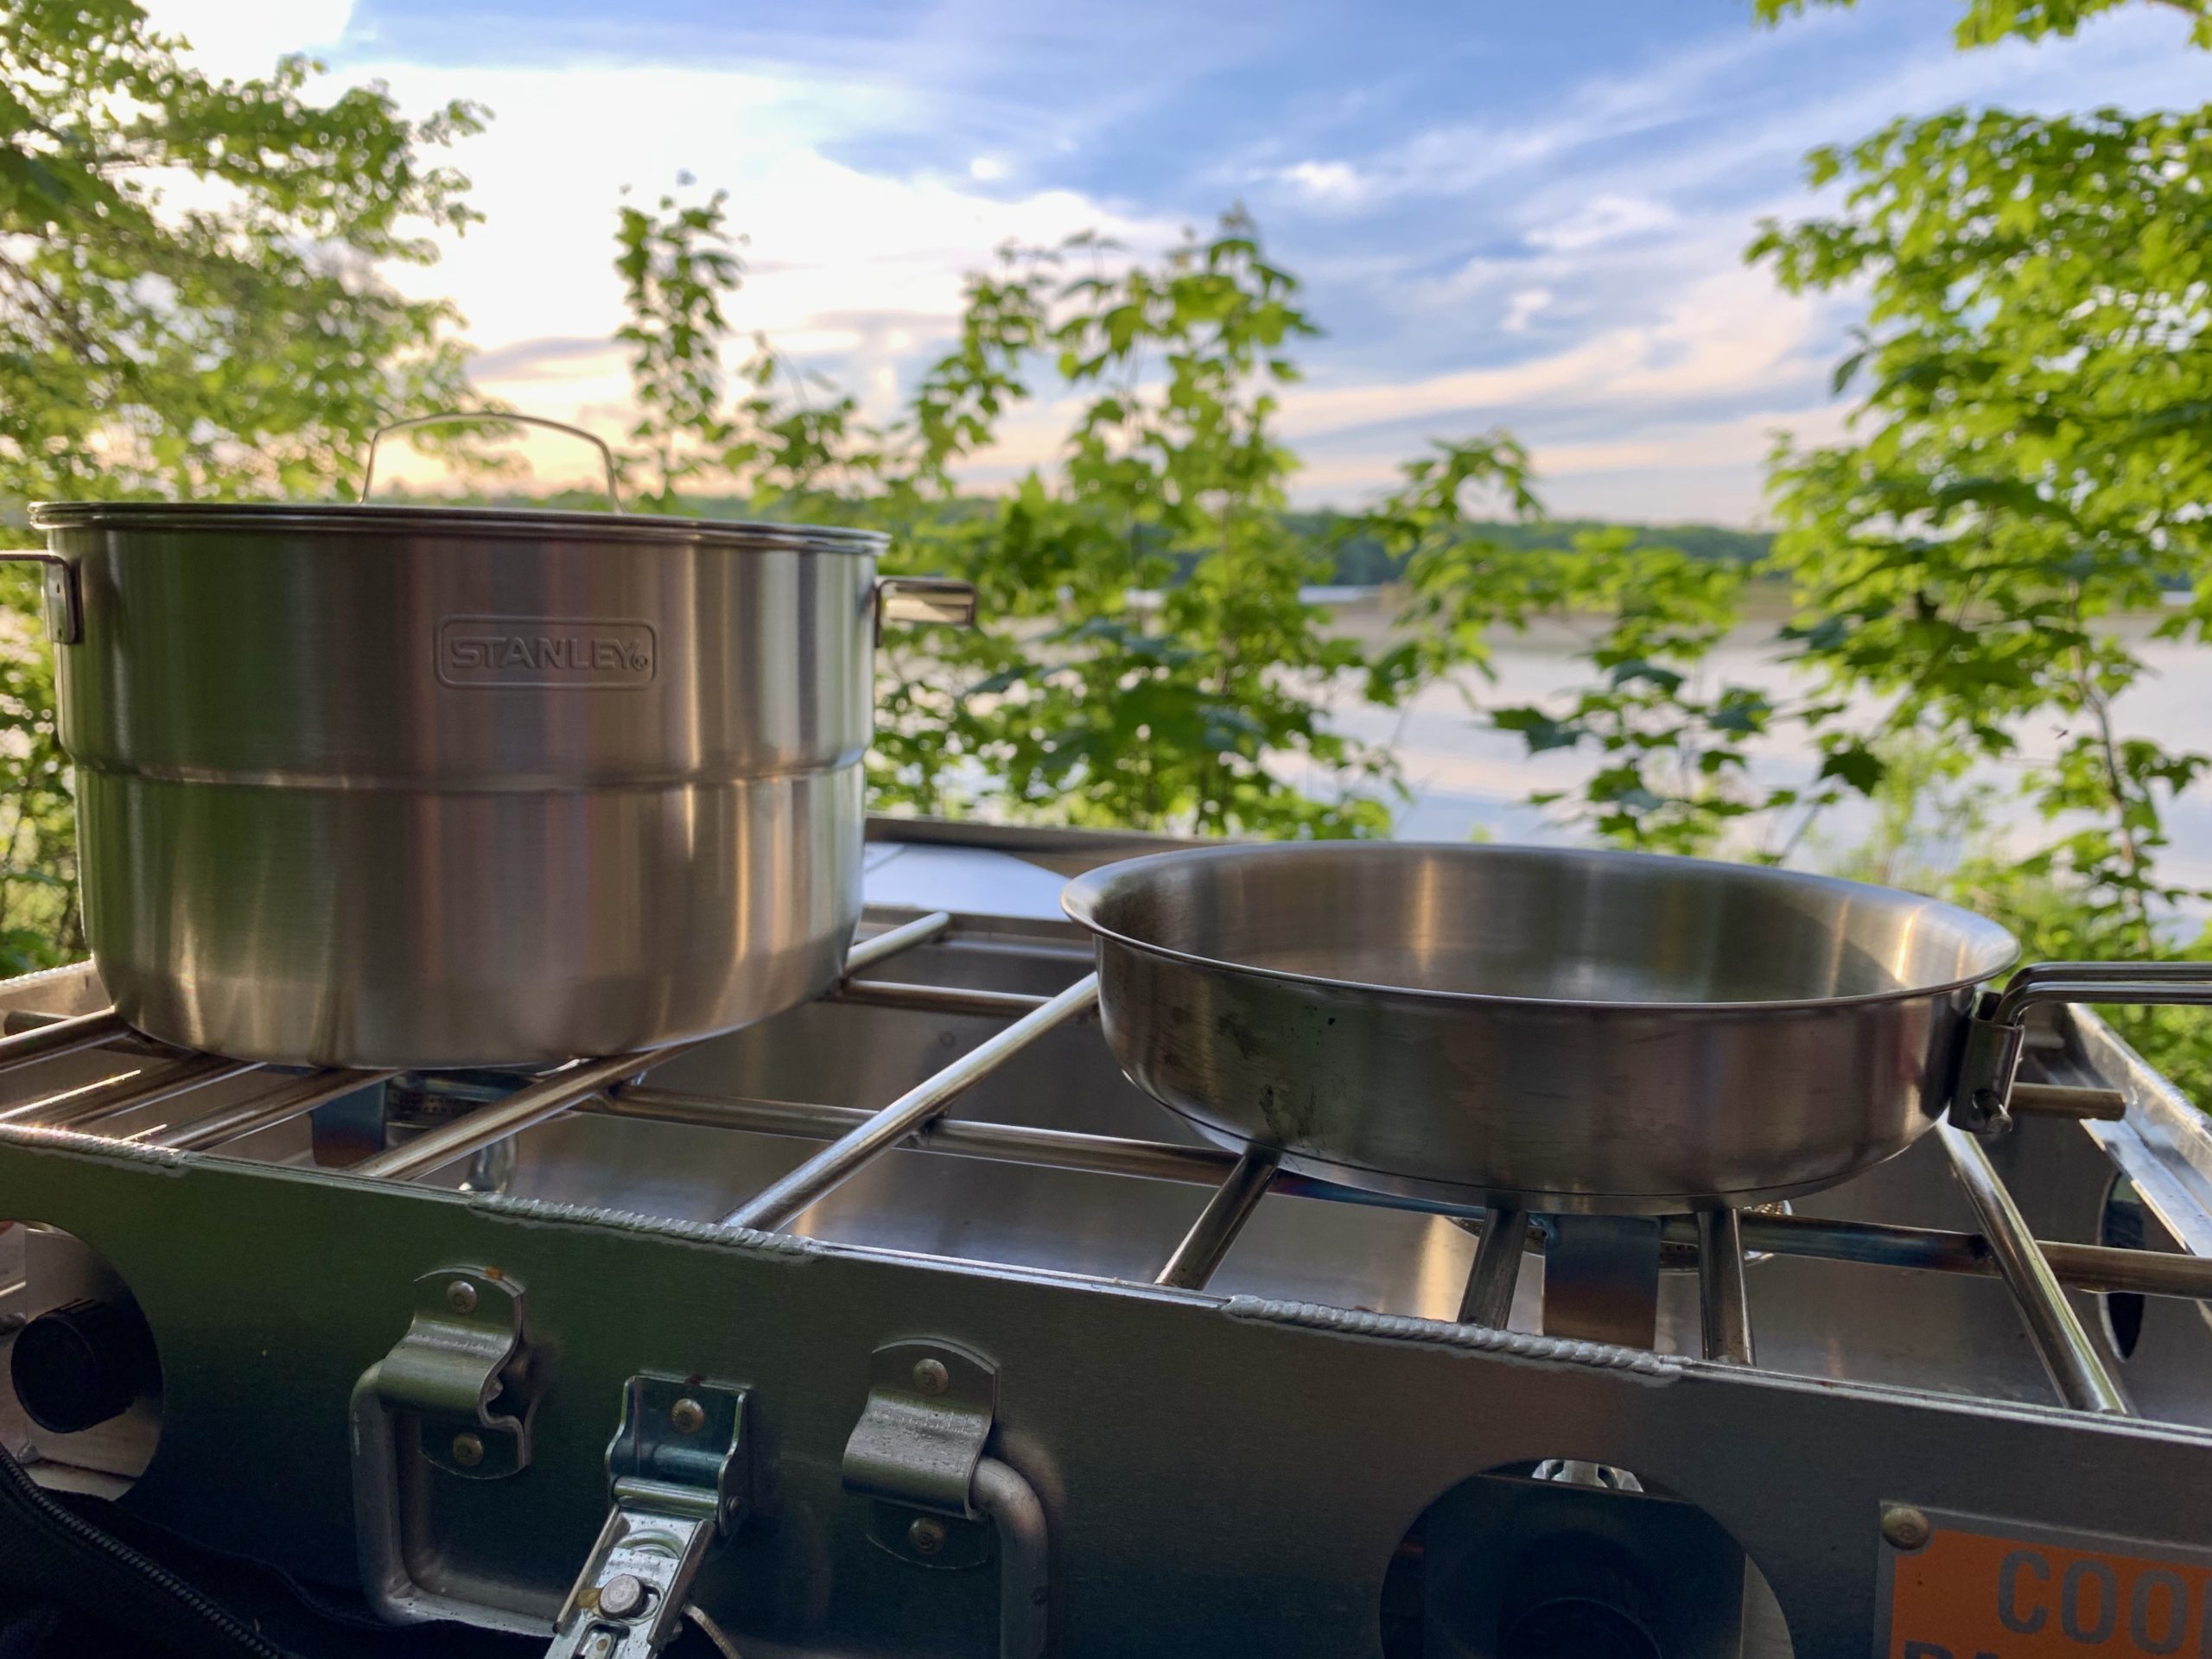 Stanley, Stainless Steel Camp Cook set View-it 4 me..(Review) 